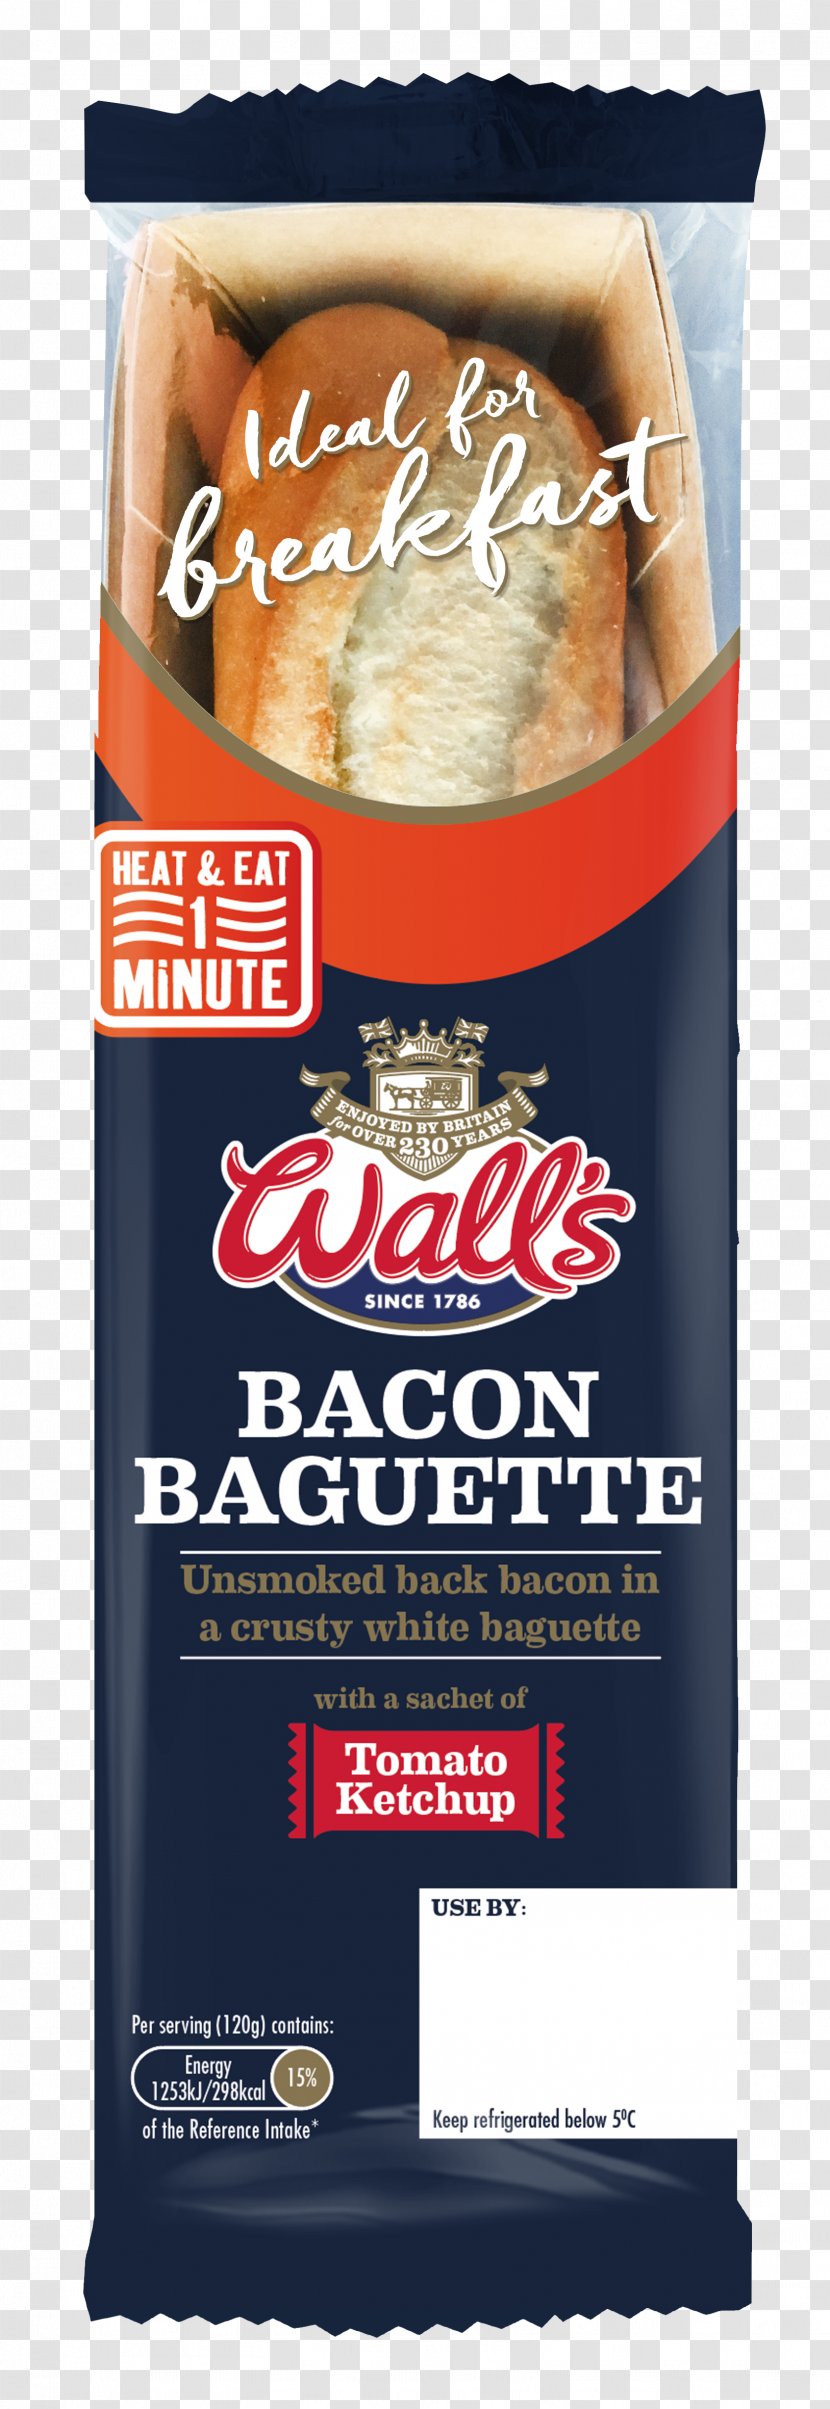 Baguette Bacon Muffin Breakfast Roll Transparent PNG